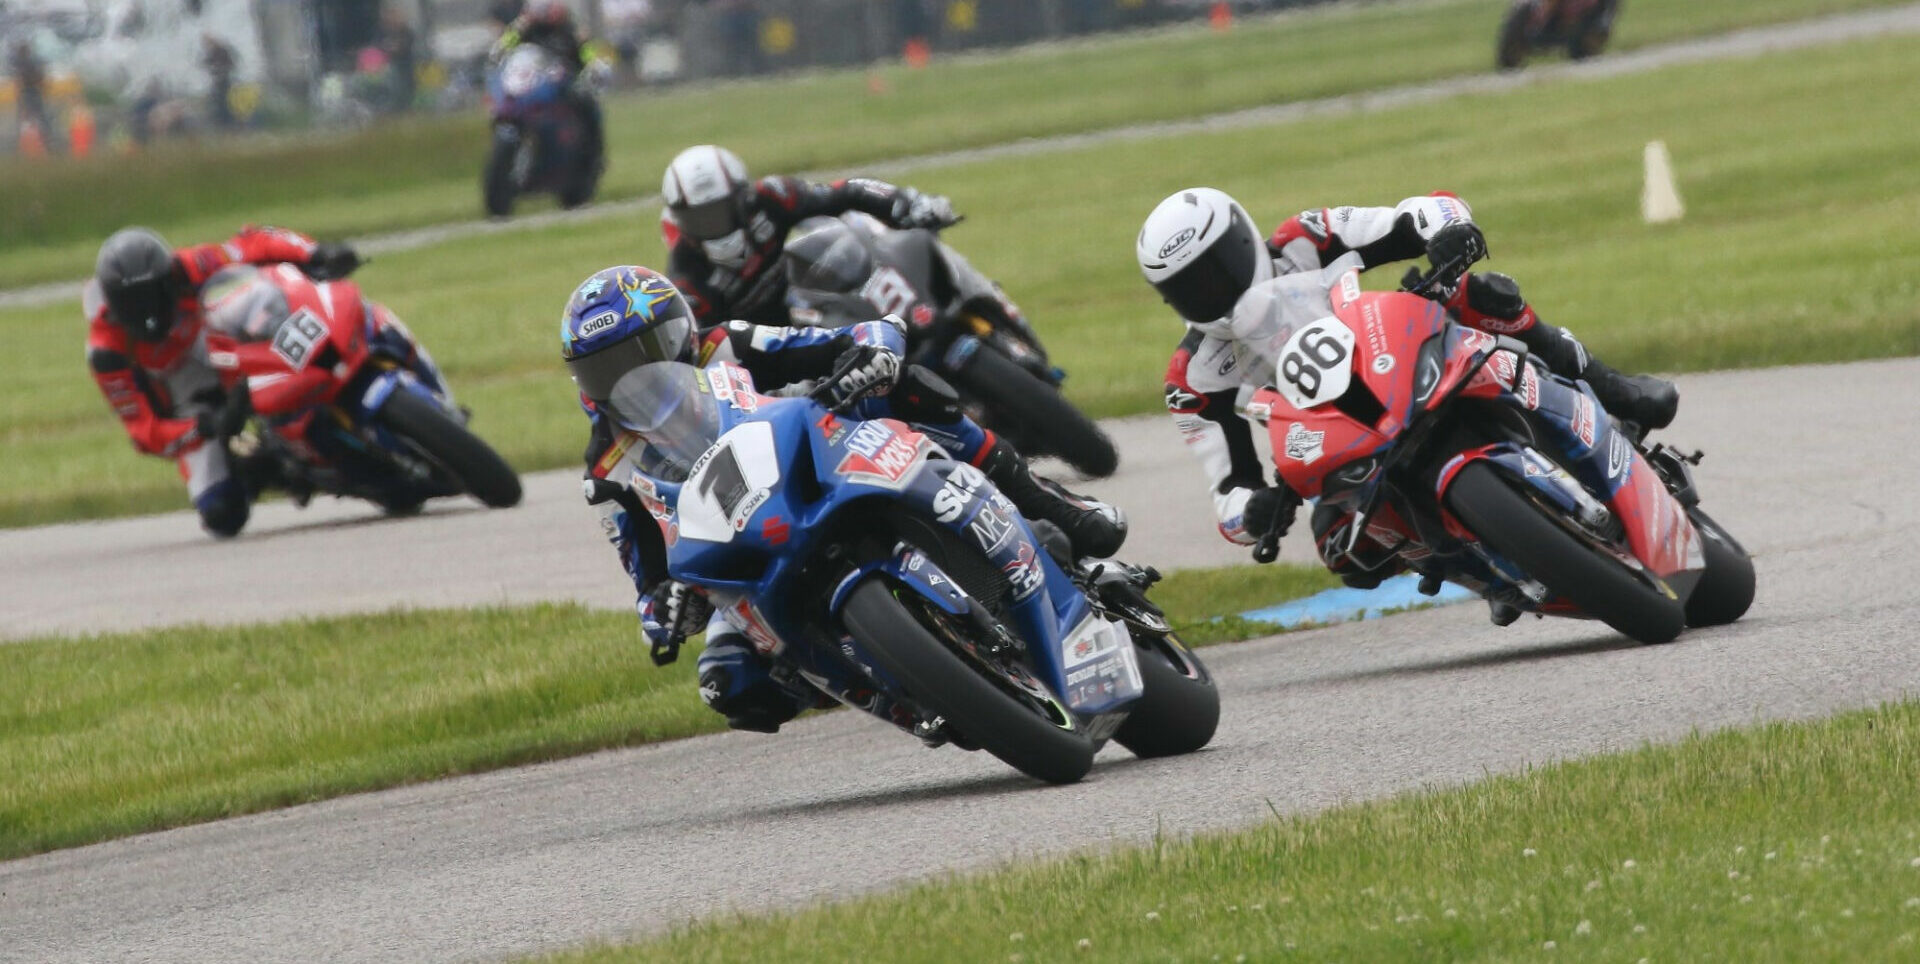 Defending Champion Alex Dumas (1) leads Ben Young (86), Trevor Daley (9), and Steven Nickerson (66) during Race Two at Grand Bend Motorplex. Photo by Rob O’Brien, courtesy CSBK.